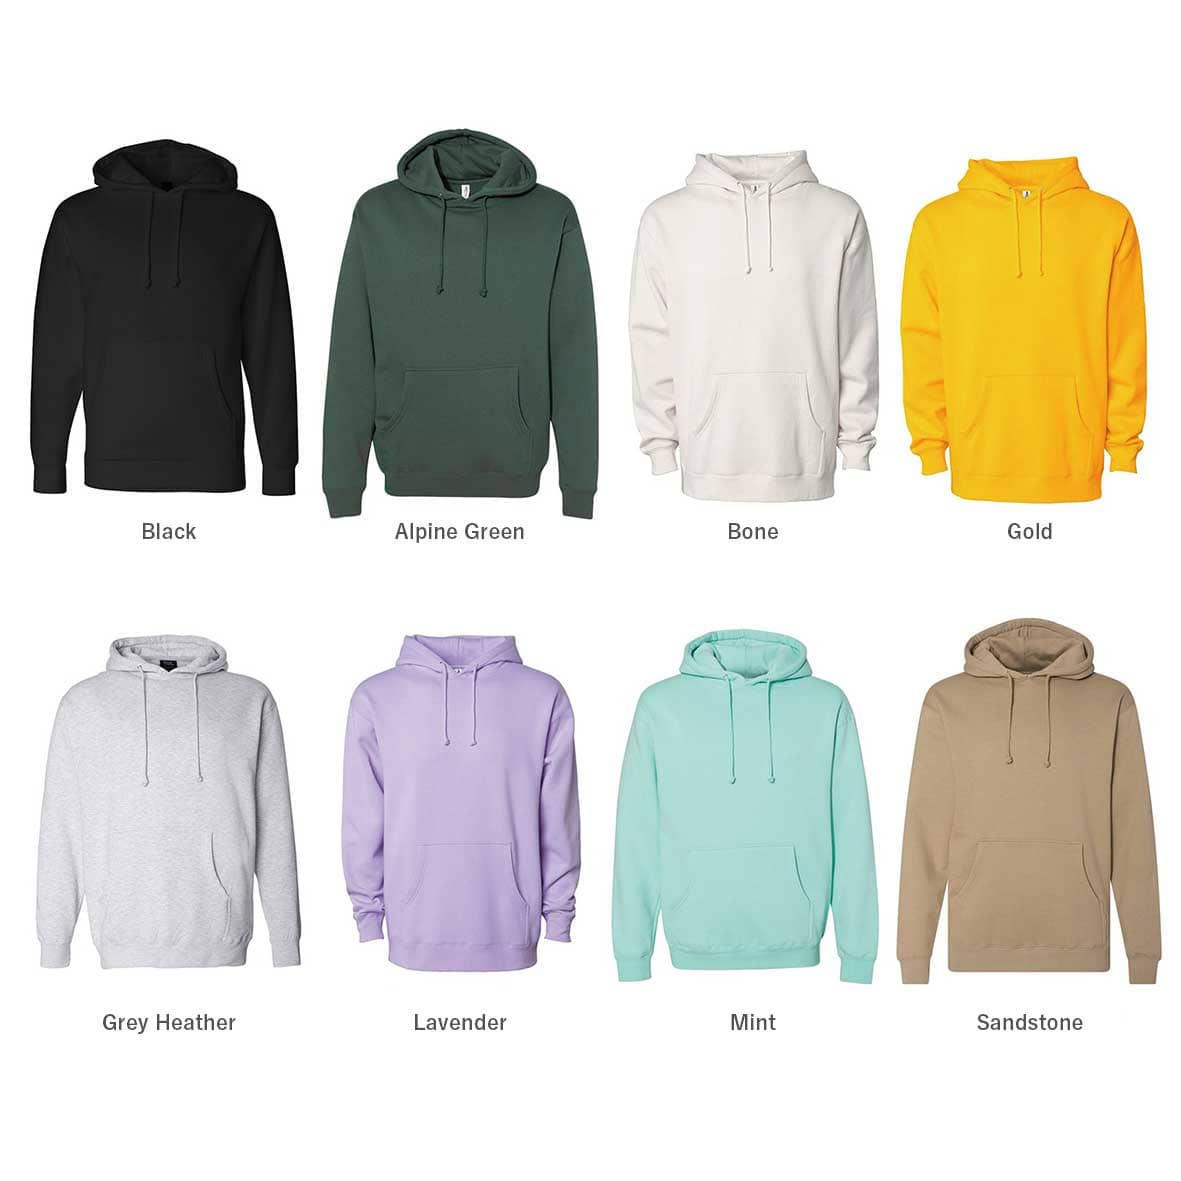 Independent インデペンデント 10.0 oz Hooded Pullover Sweatshirt (品番IND4000)